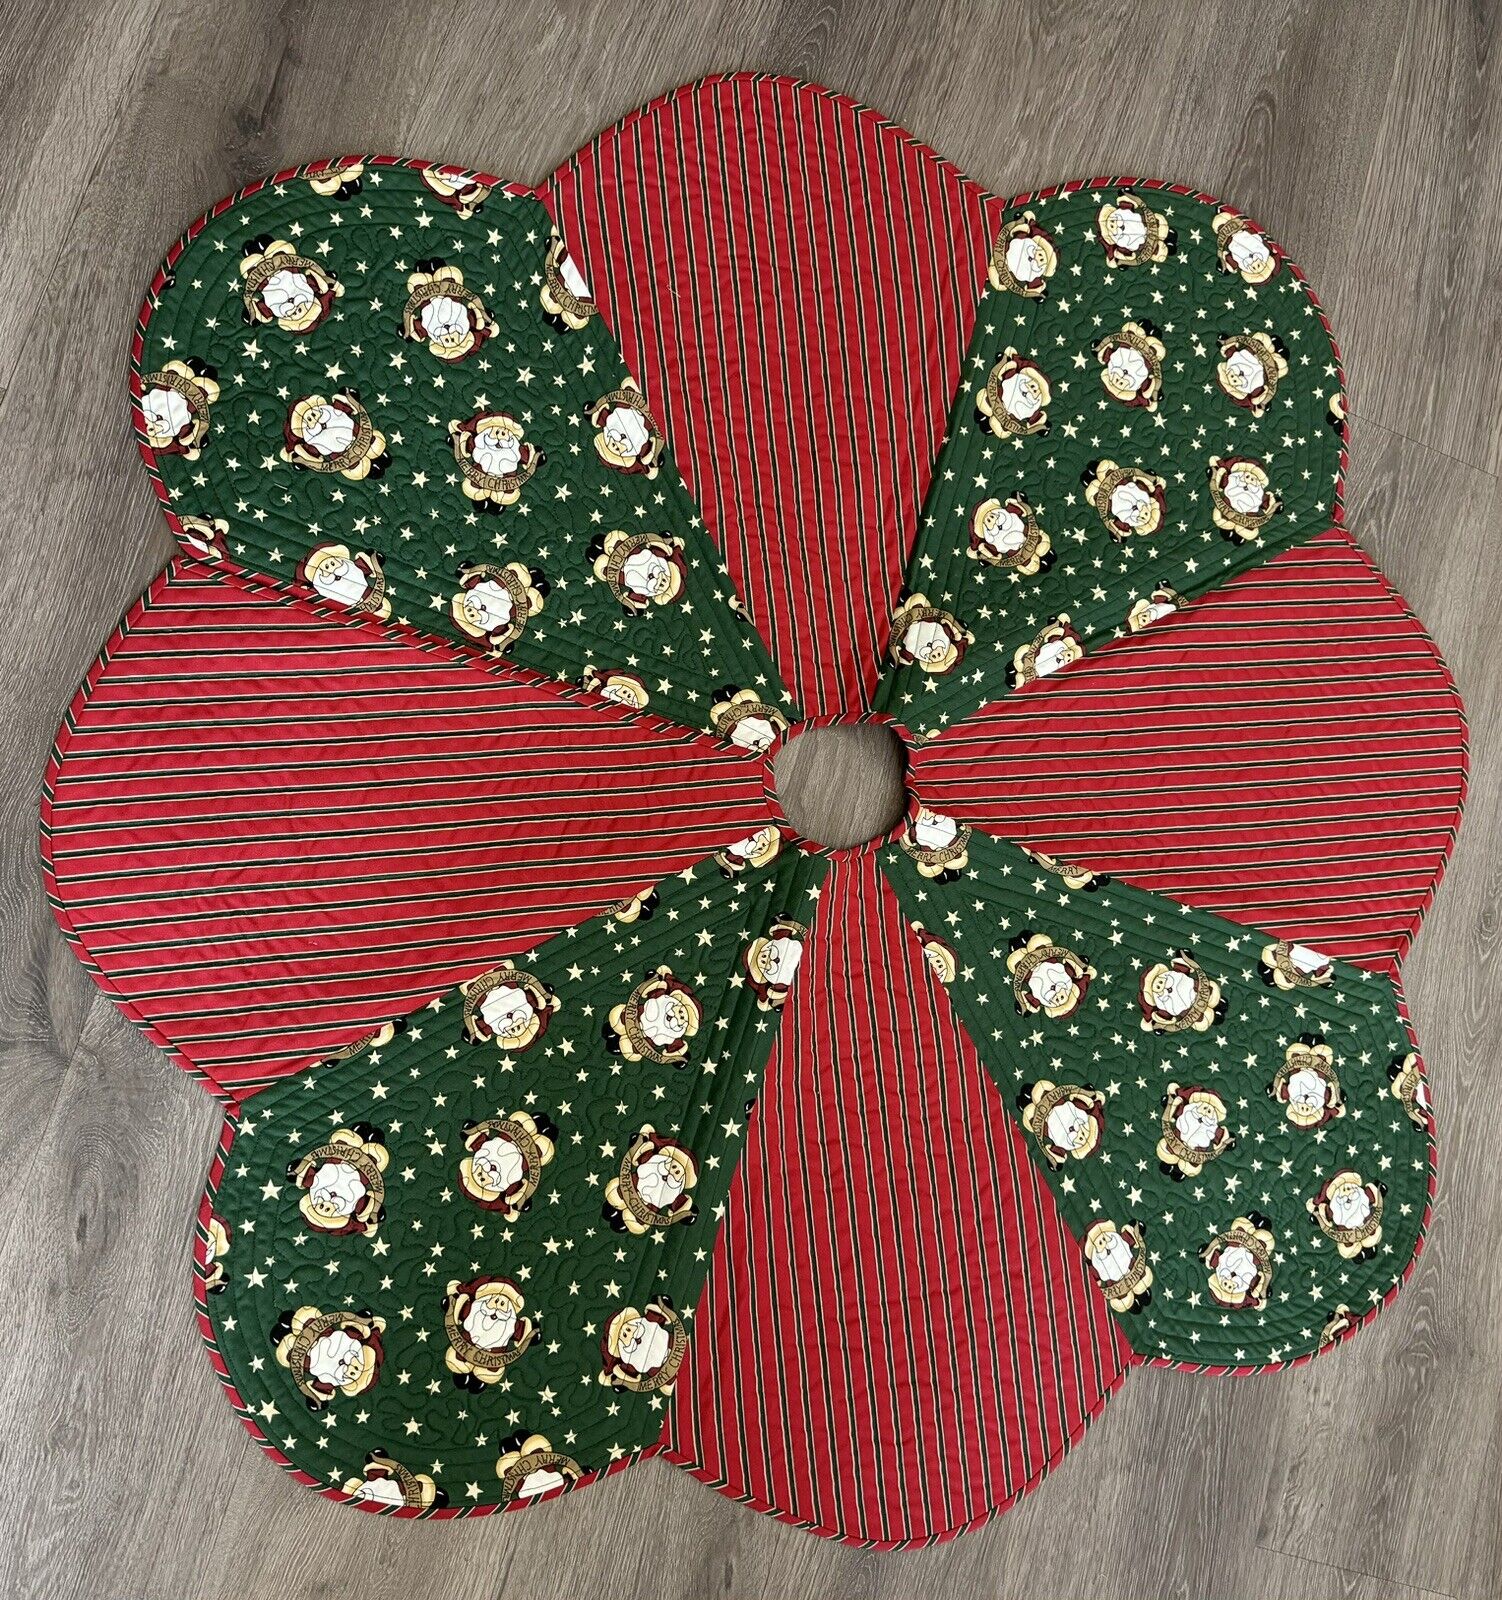 Two Sided Christmas Tree Skirt - 12 Days Of Christmas and Santa Clause